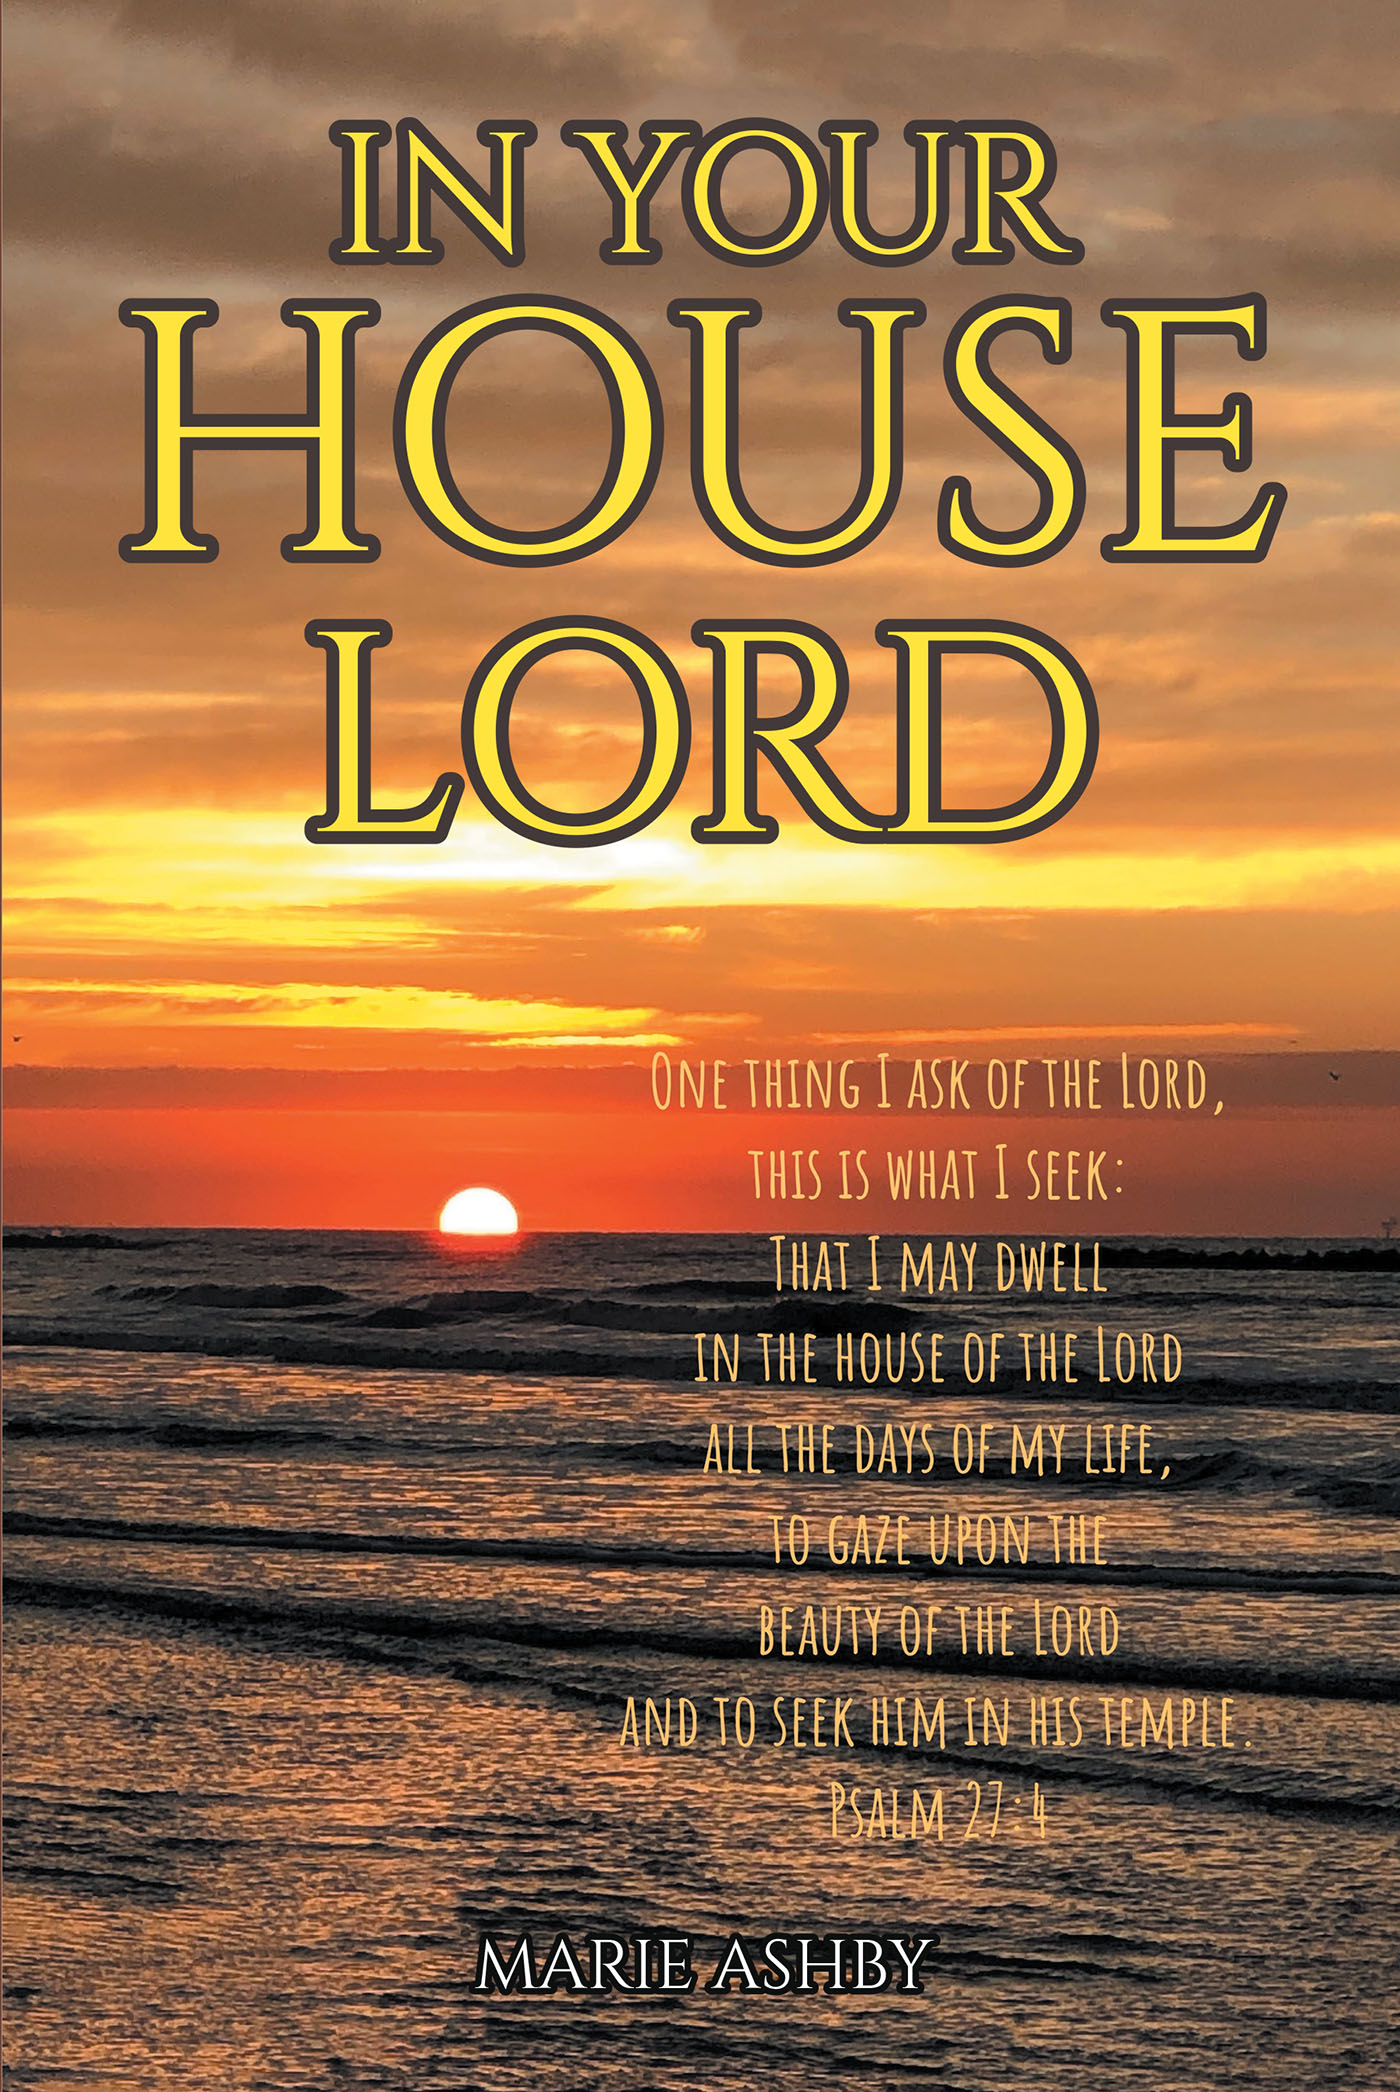 Author Marie Ashby’s New Book, "In Your House Lord," is a Yearlong Devotional of Letters to God That Reveal the Wonders and Blessings Granted to the Author by the Lord